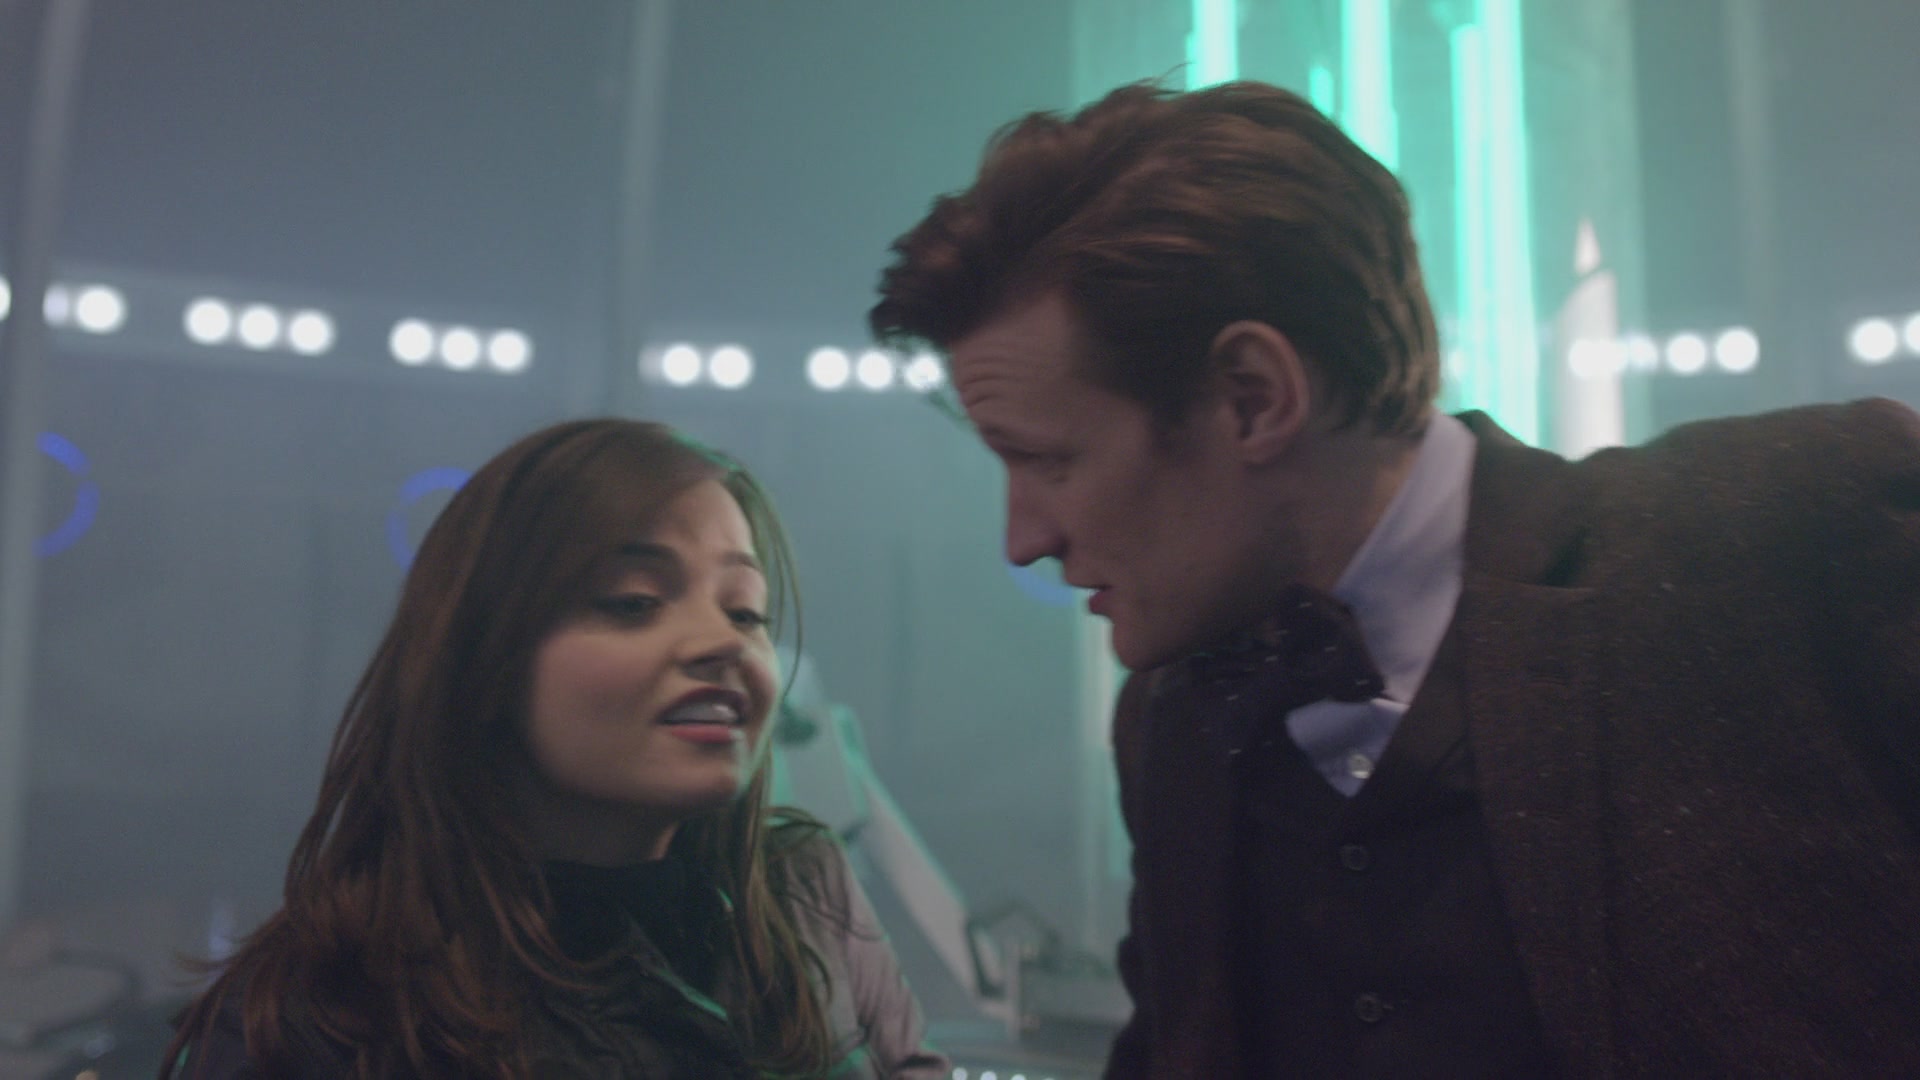 DayOfTheDoctor-Caps-0054.jpg